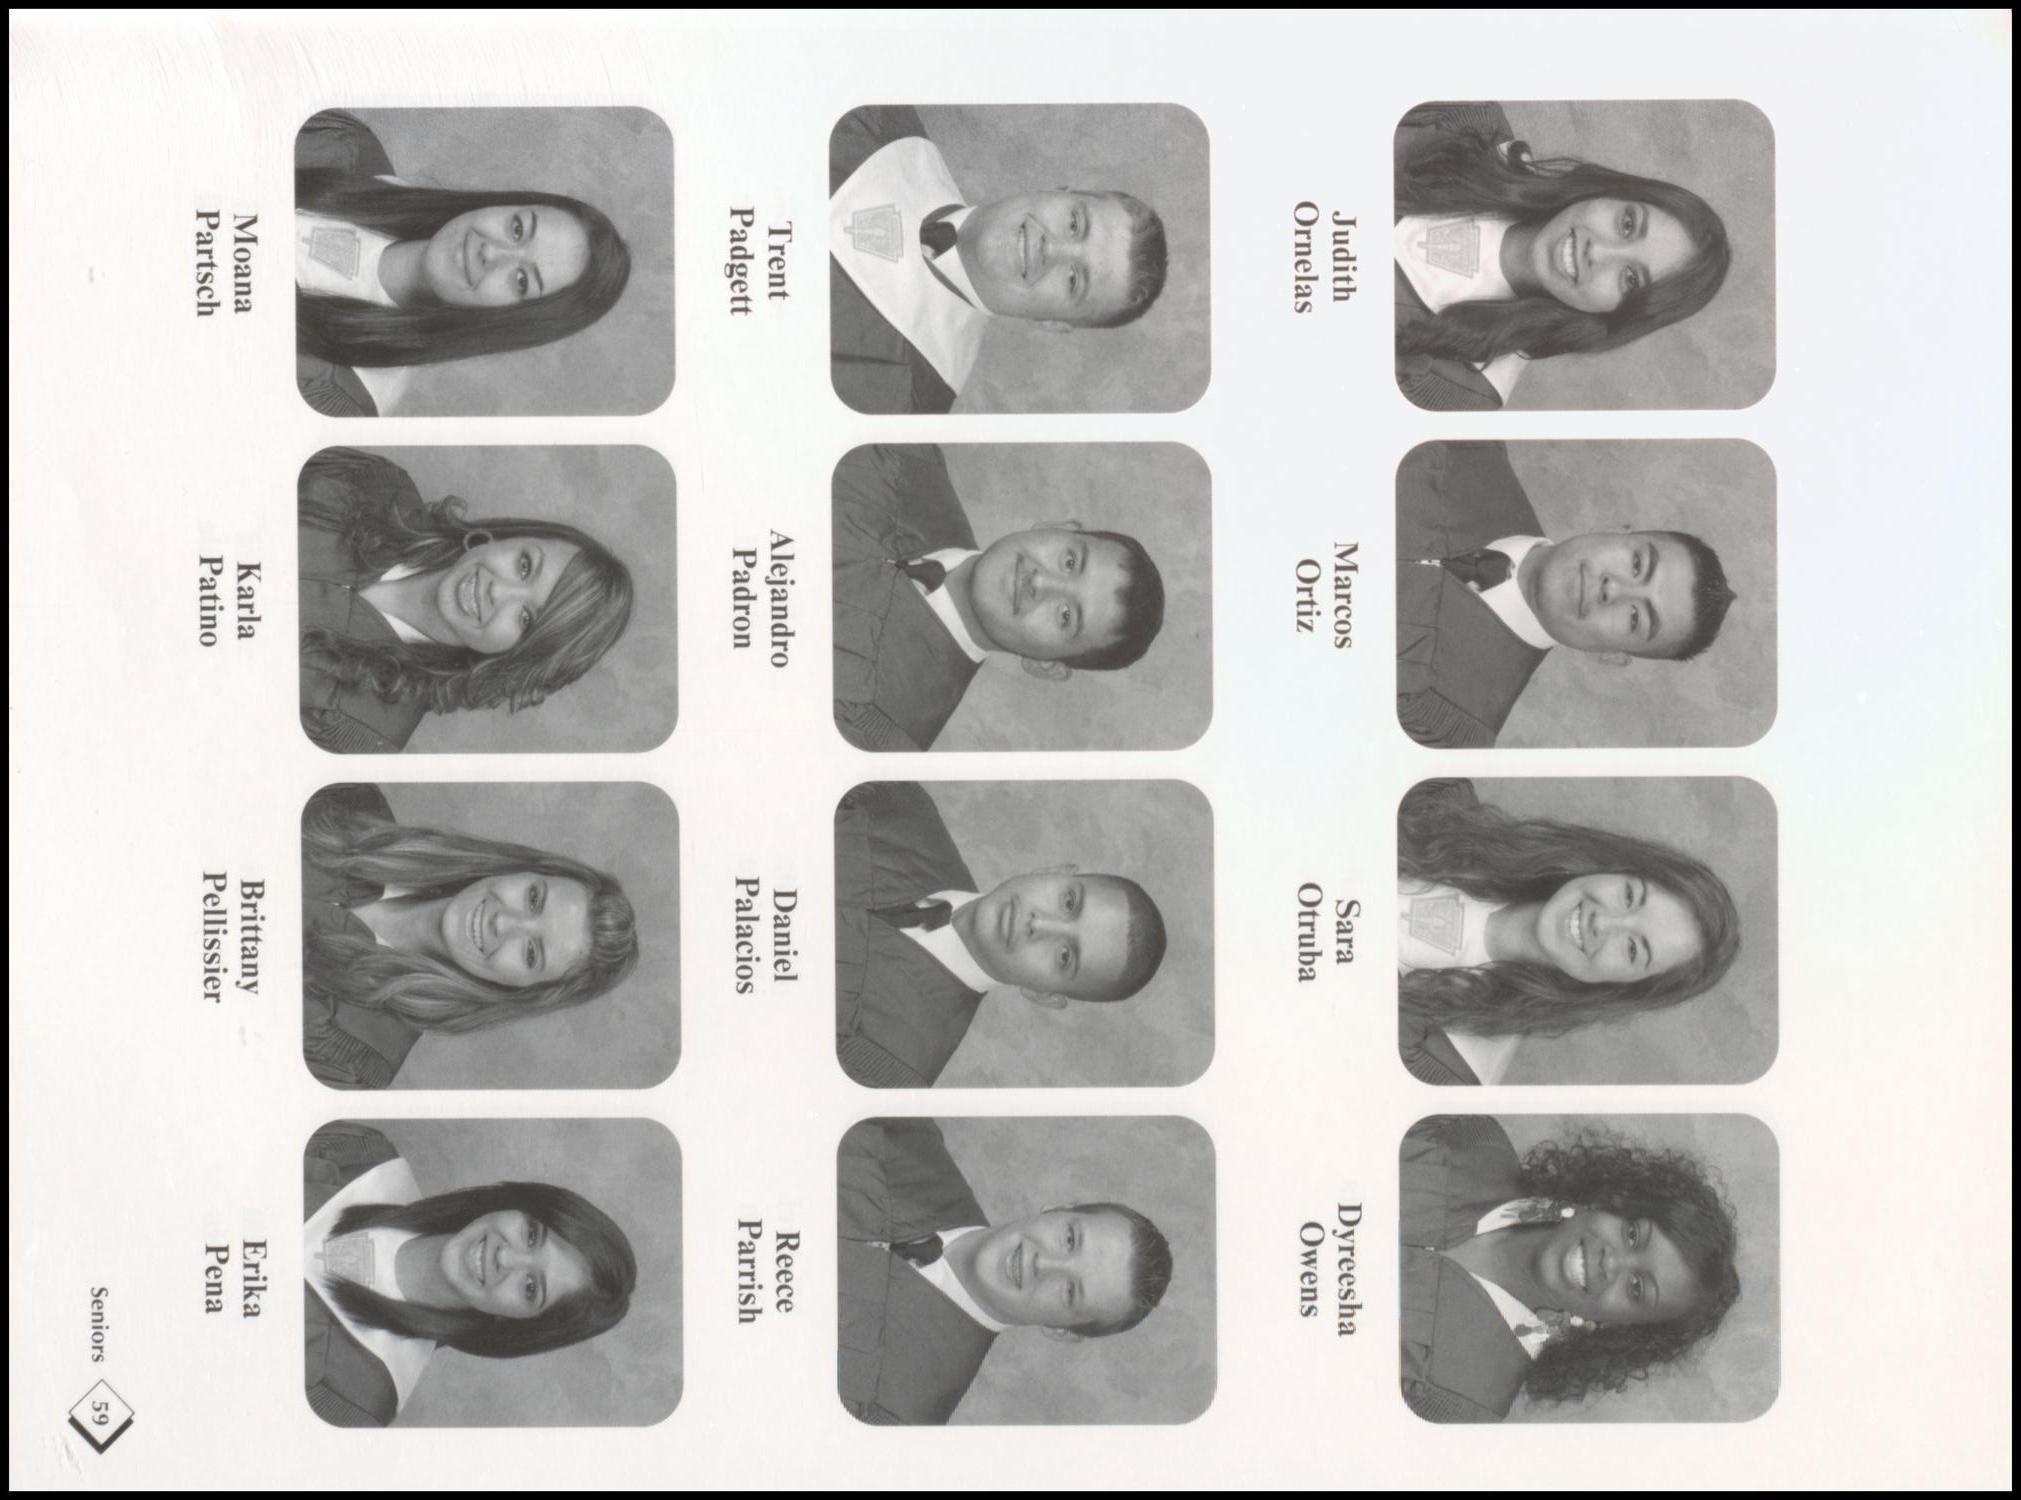 The Governor, Yearbook of Ross S. Sterling High School, 2010
                                                
                                                    59
                                                